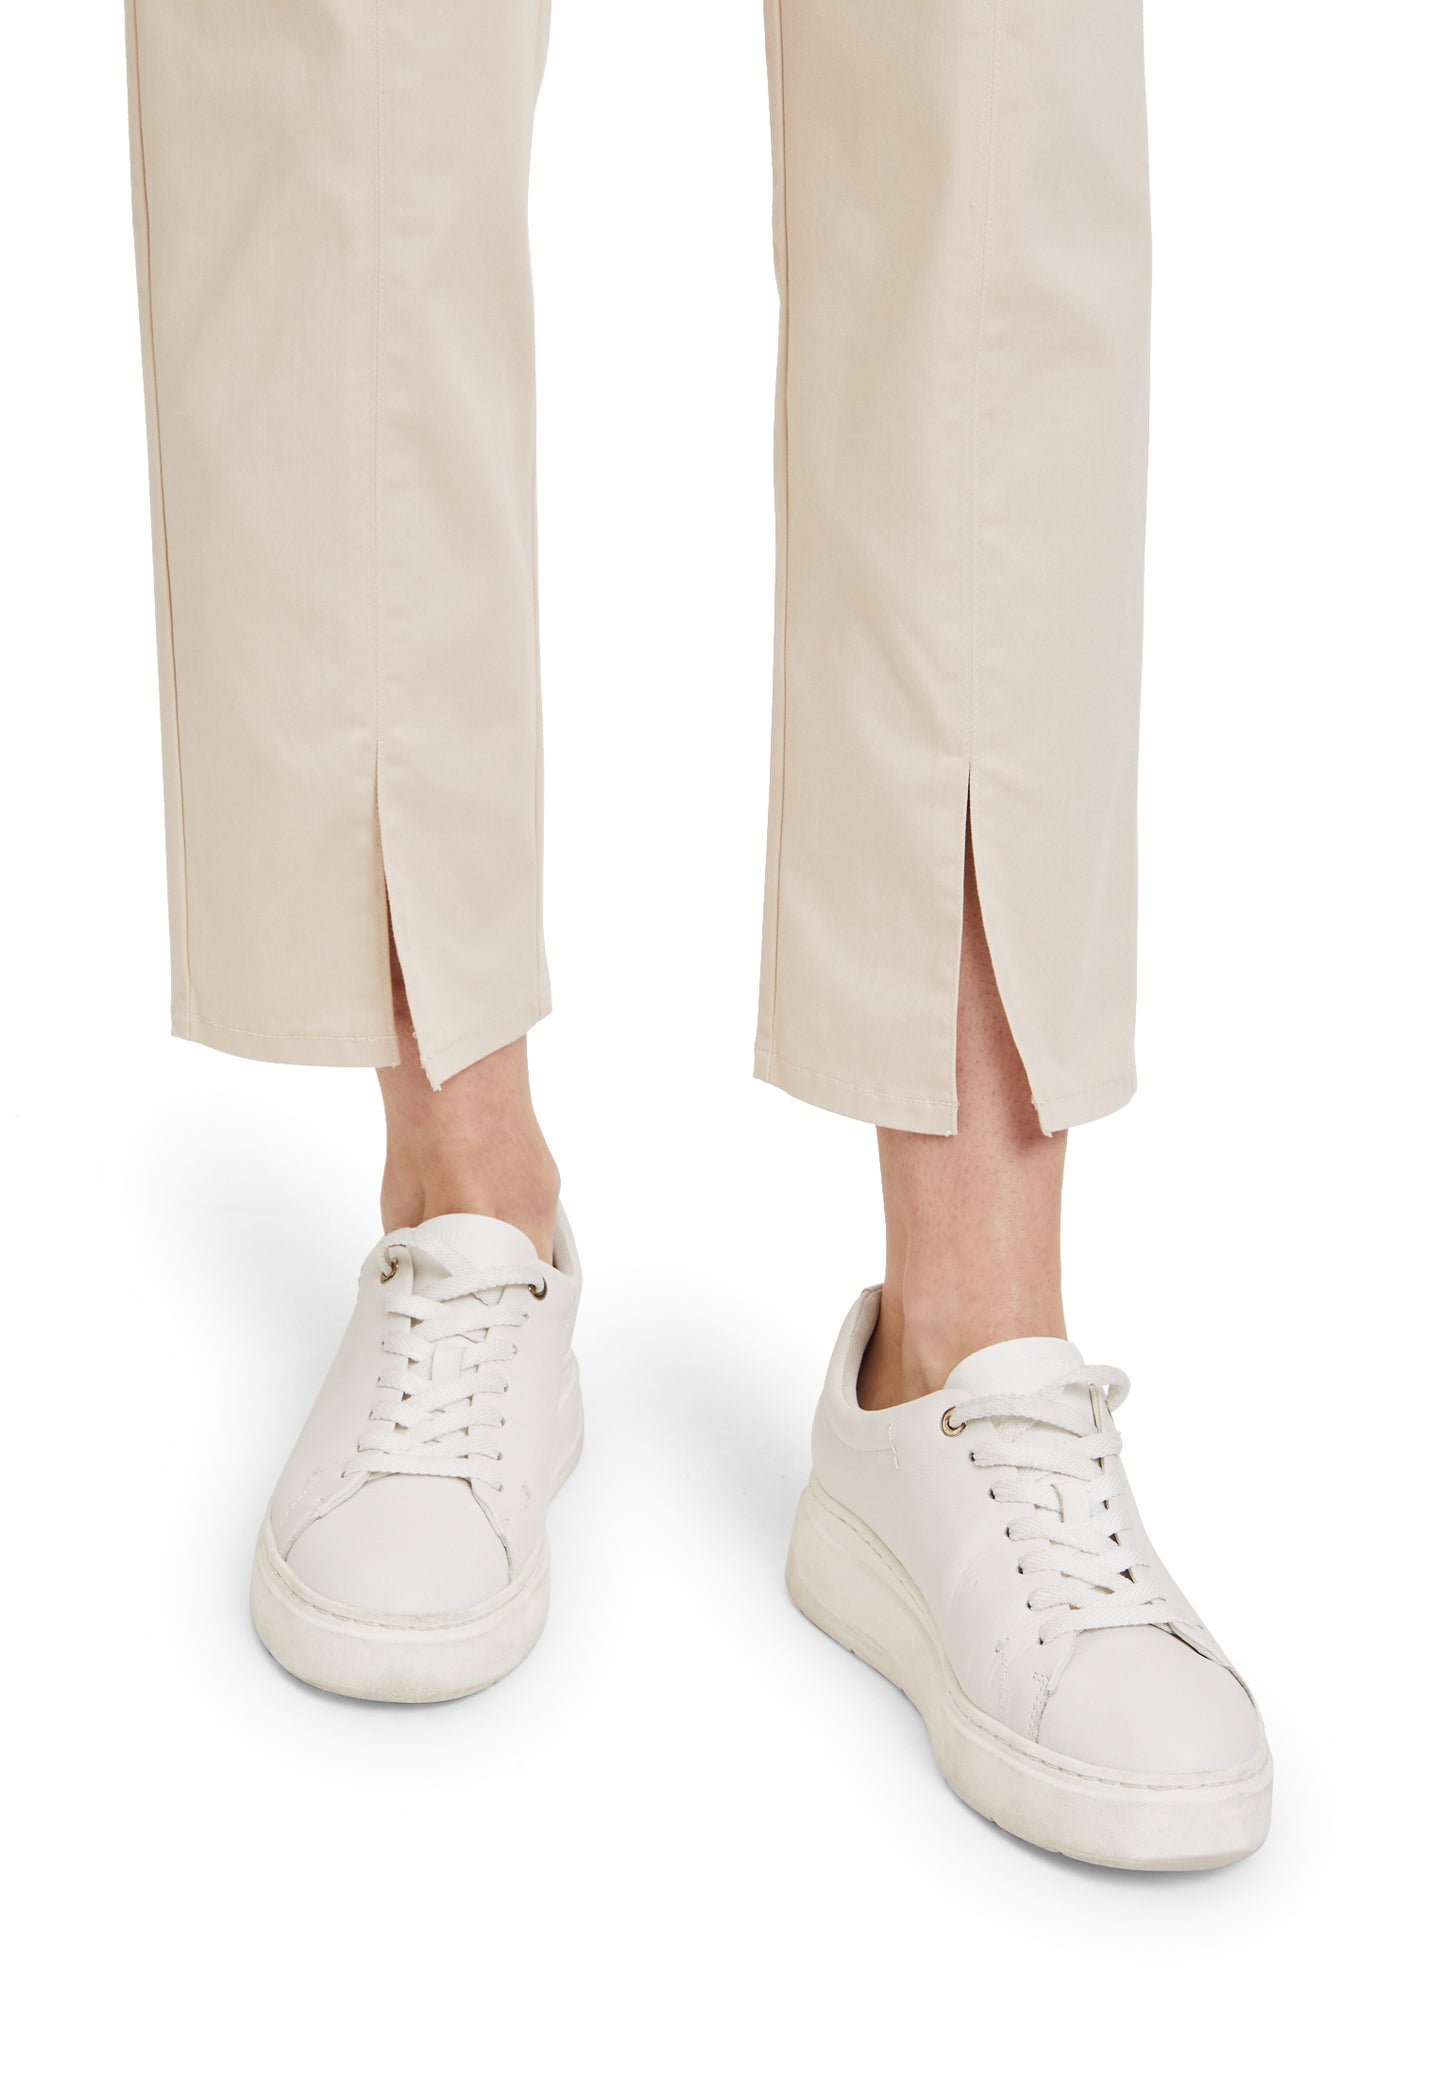 Trousers classic 7/8 length